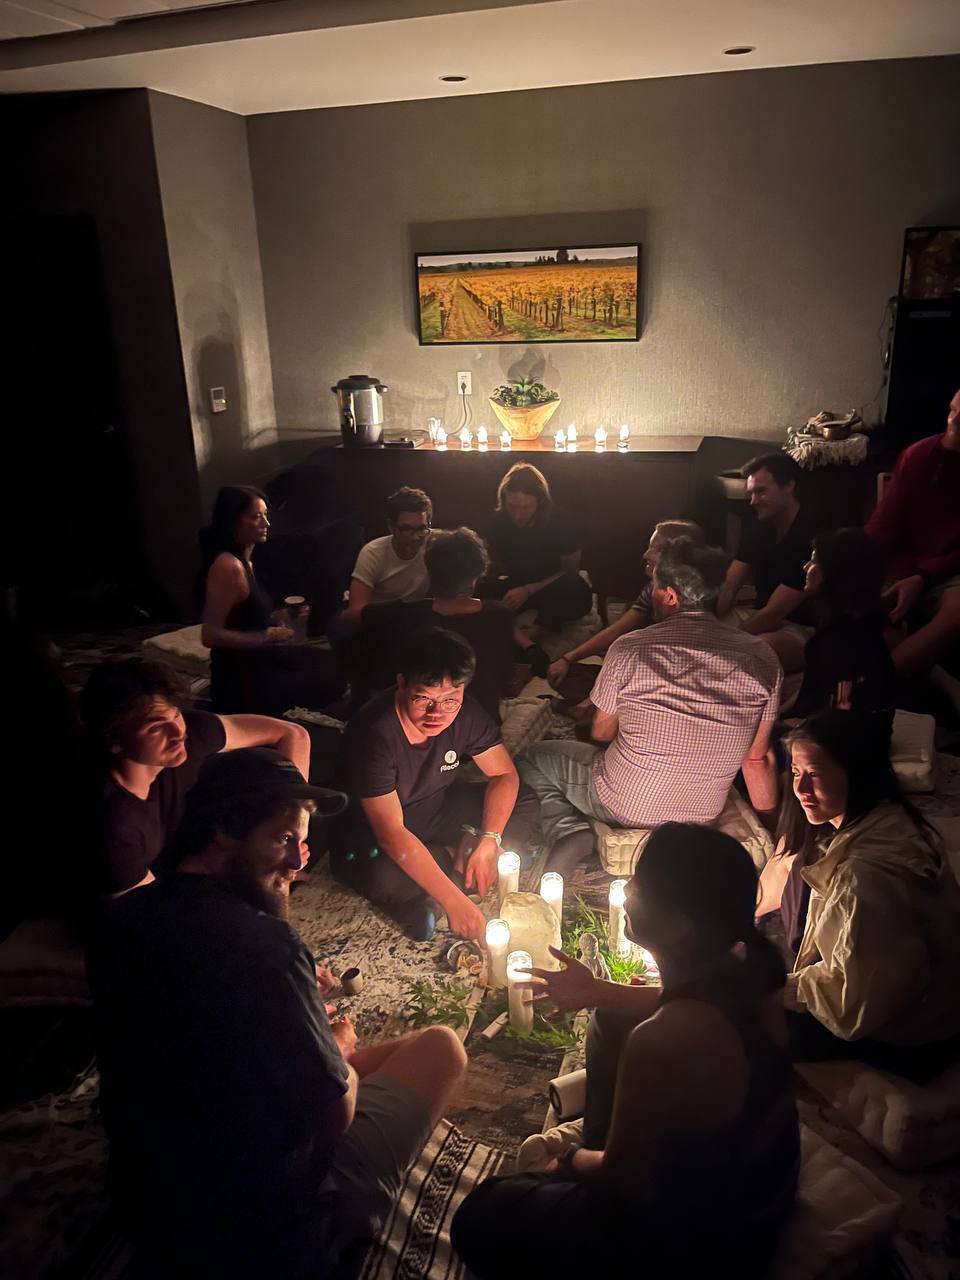 A candlelight session on life and death, explored the ritual and spiritual side of life during Edge Esmeralda.